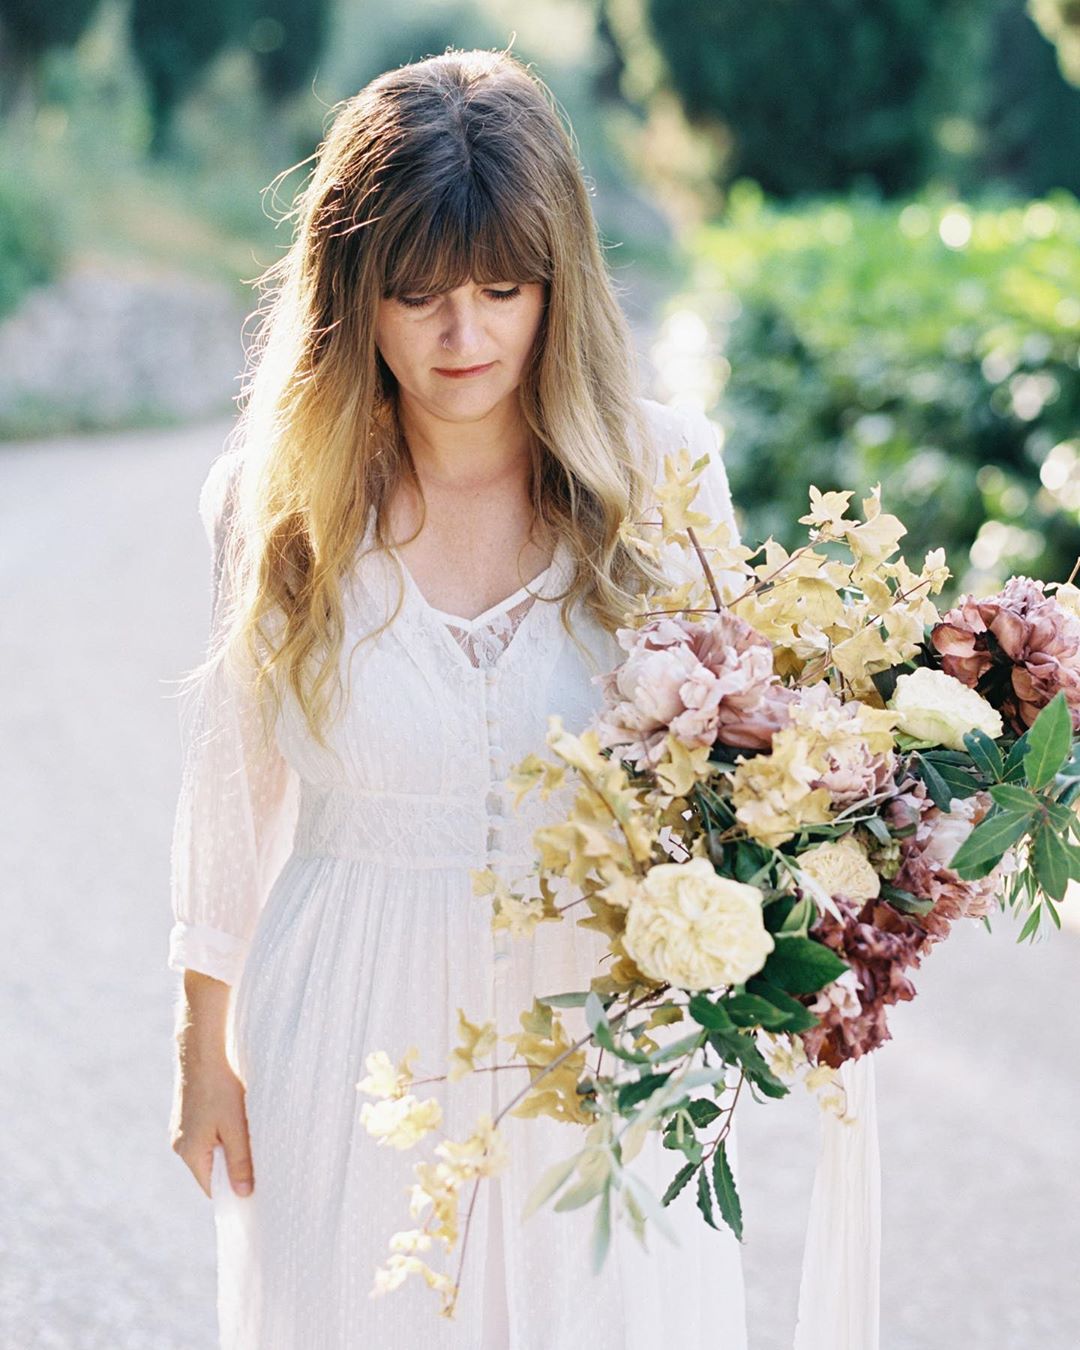 Beautiful bride in a wedding dress, with bangs, holding a large bouquet of flowers walking towards the camera.